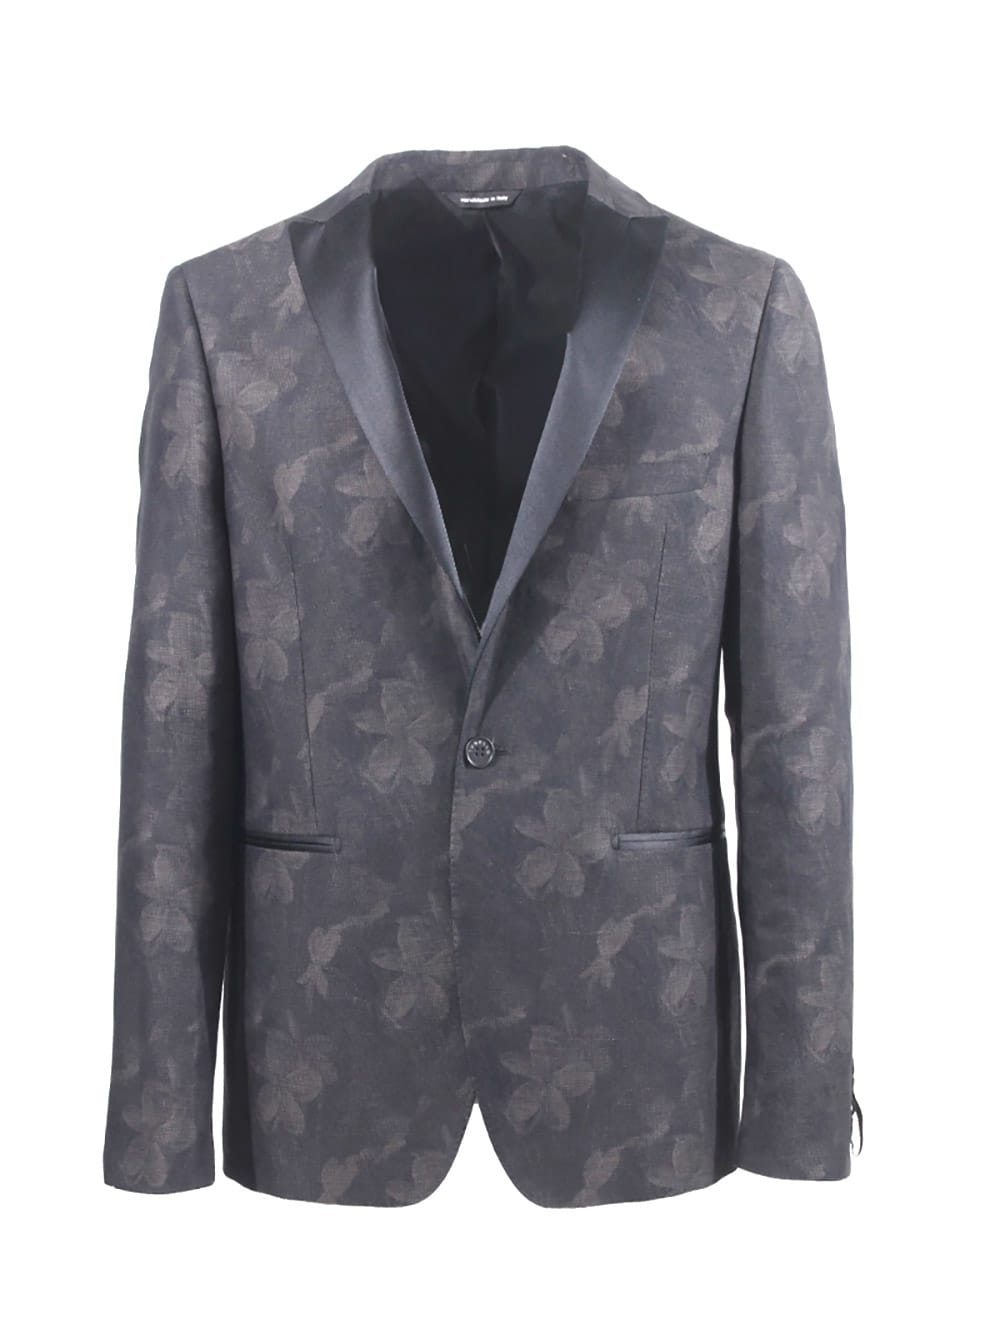 Tonello Single-breasted Floral Patterned Jacket